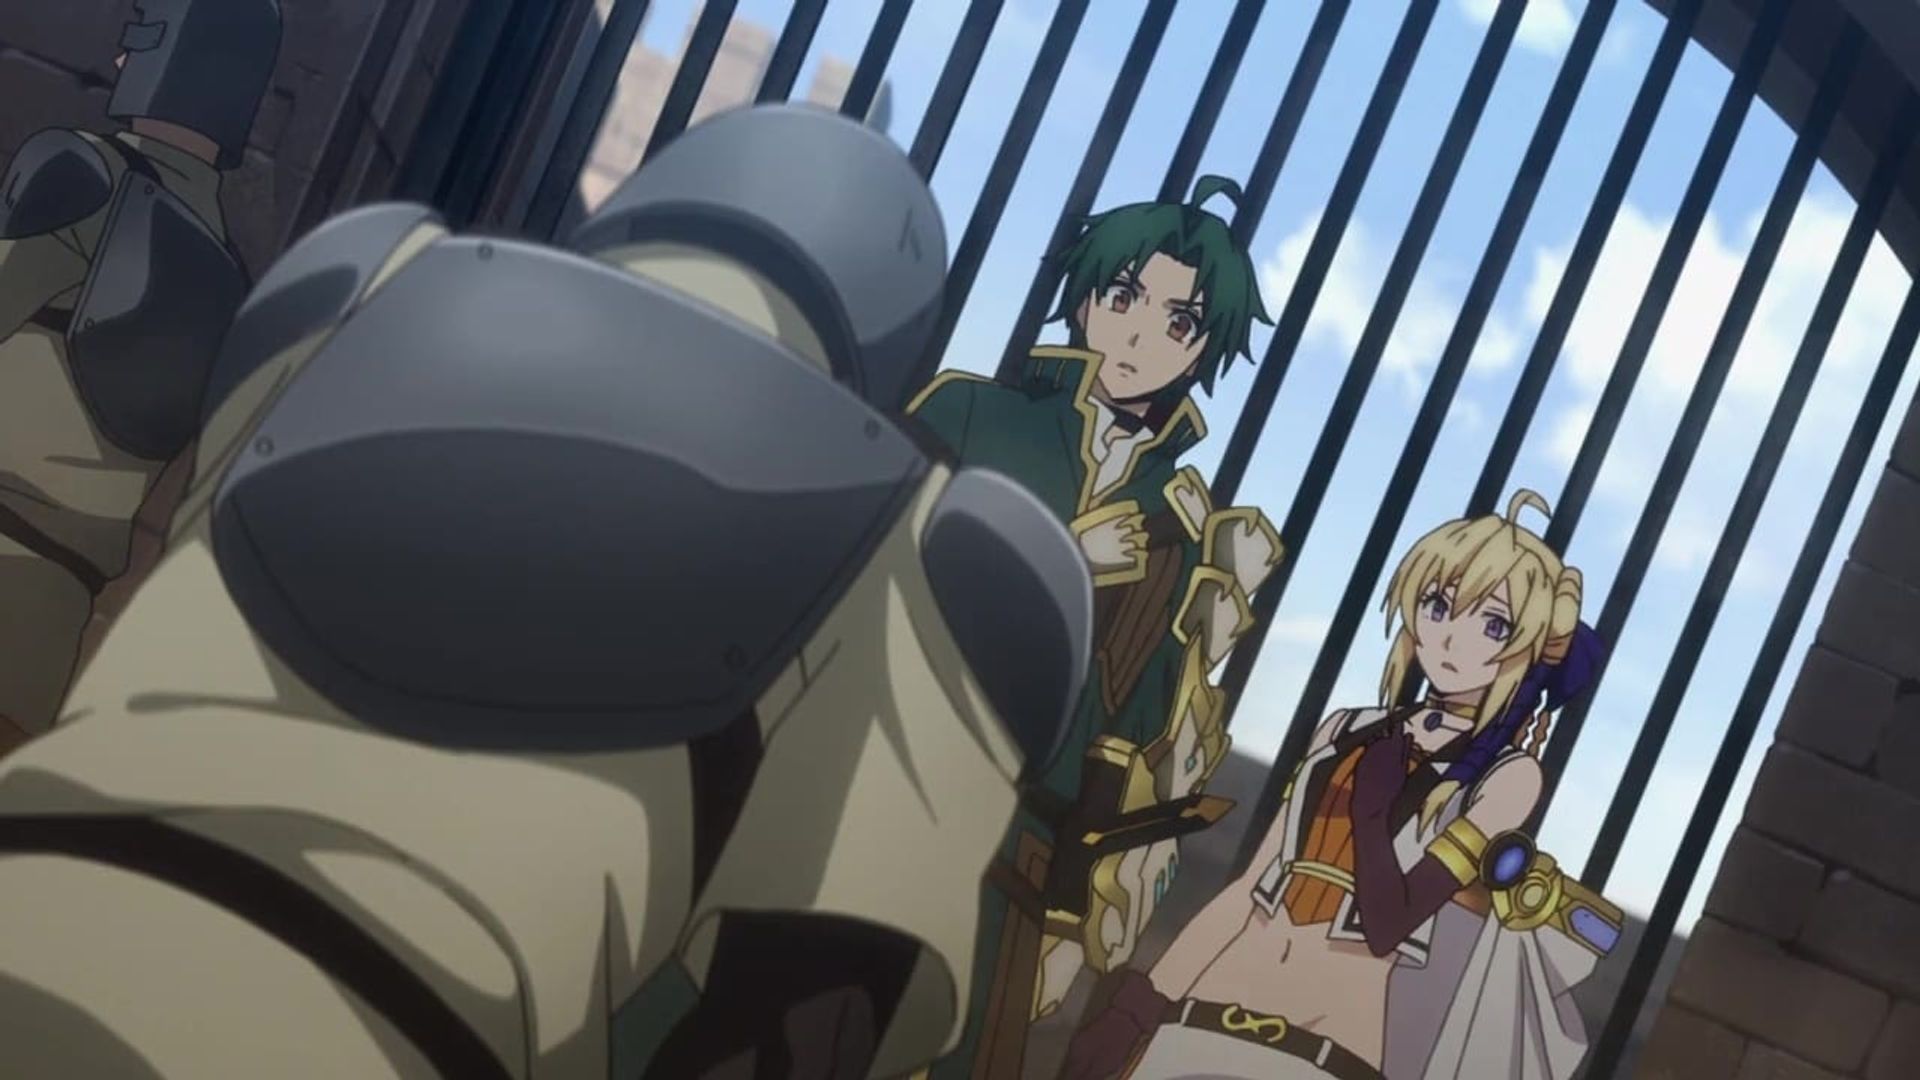 Record of Grancrest War background